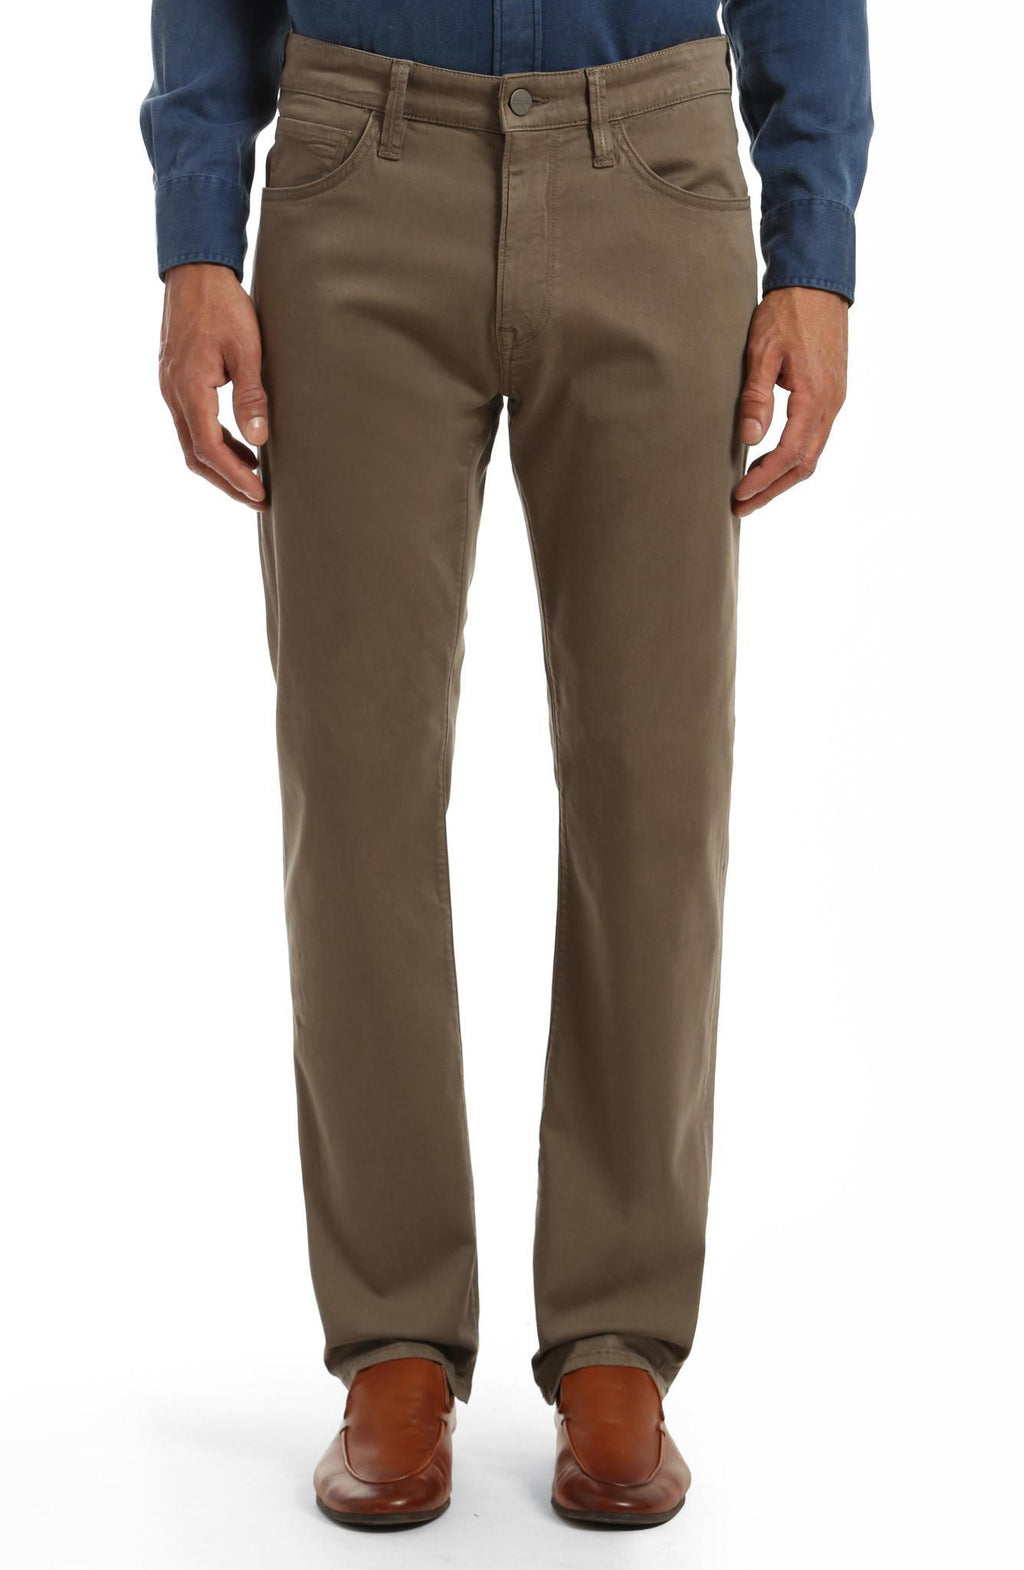 34 Heritage Courage Straight Leg Pants In Canteen Twill - Briggs Clothiers